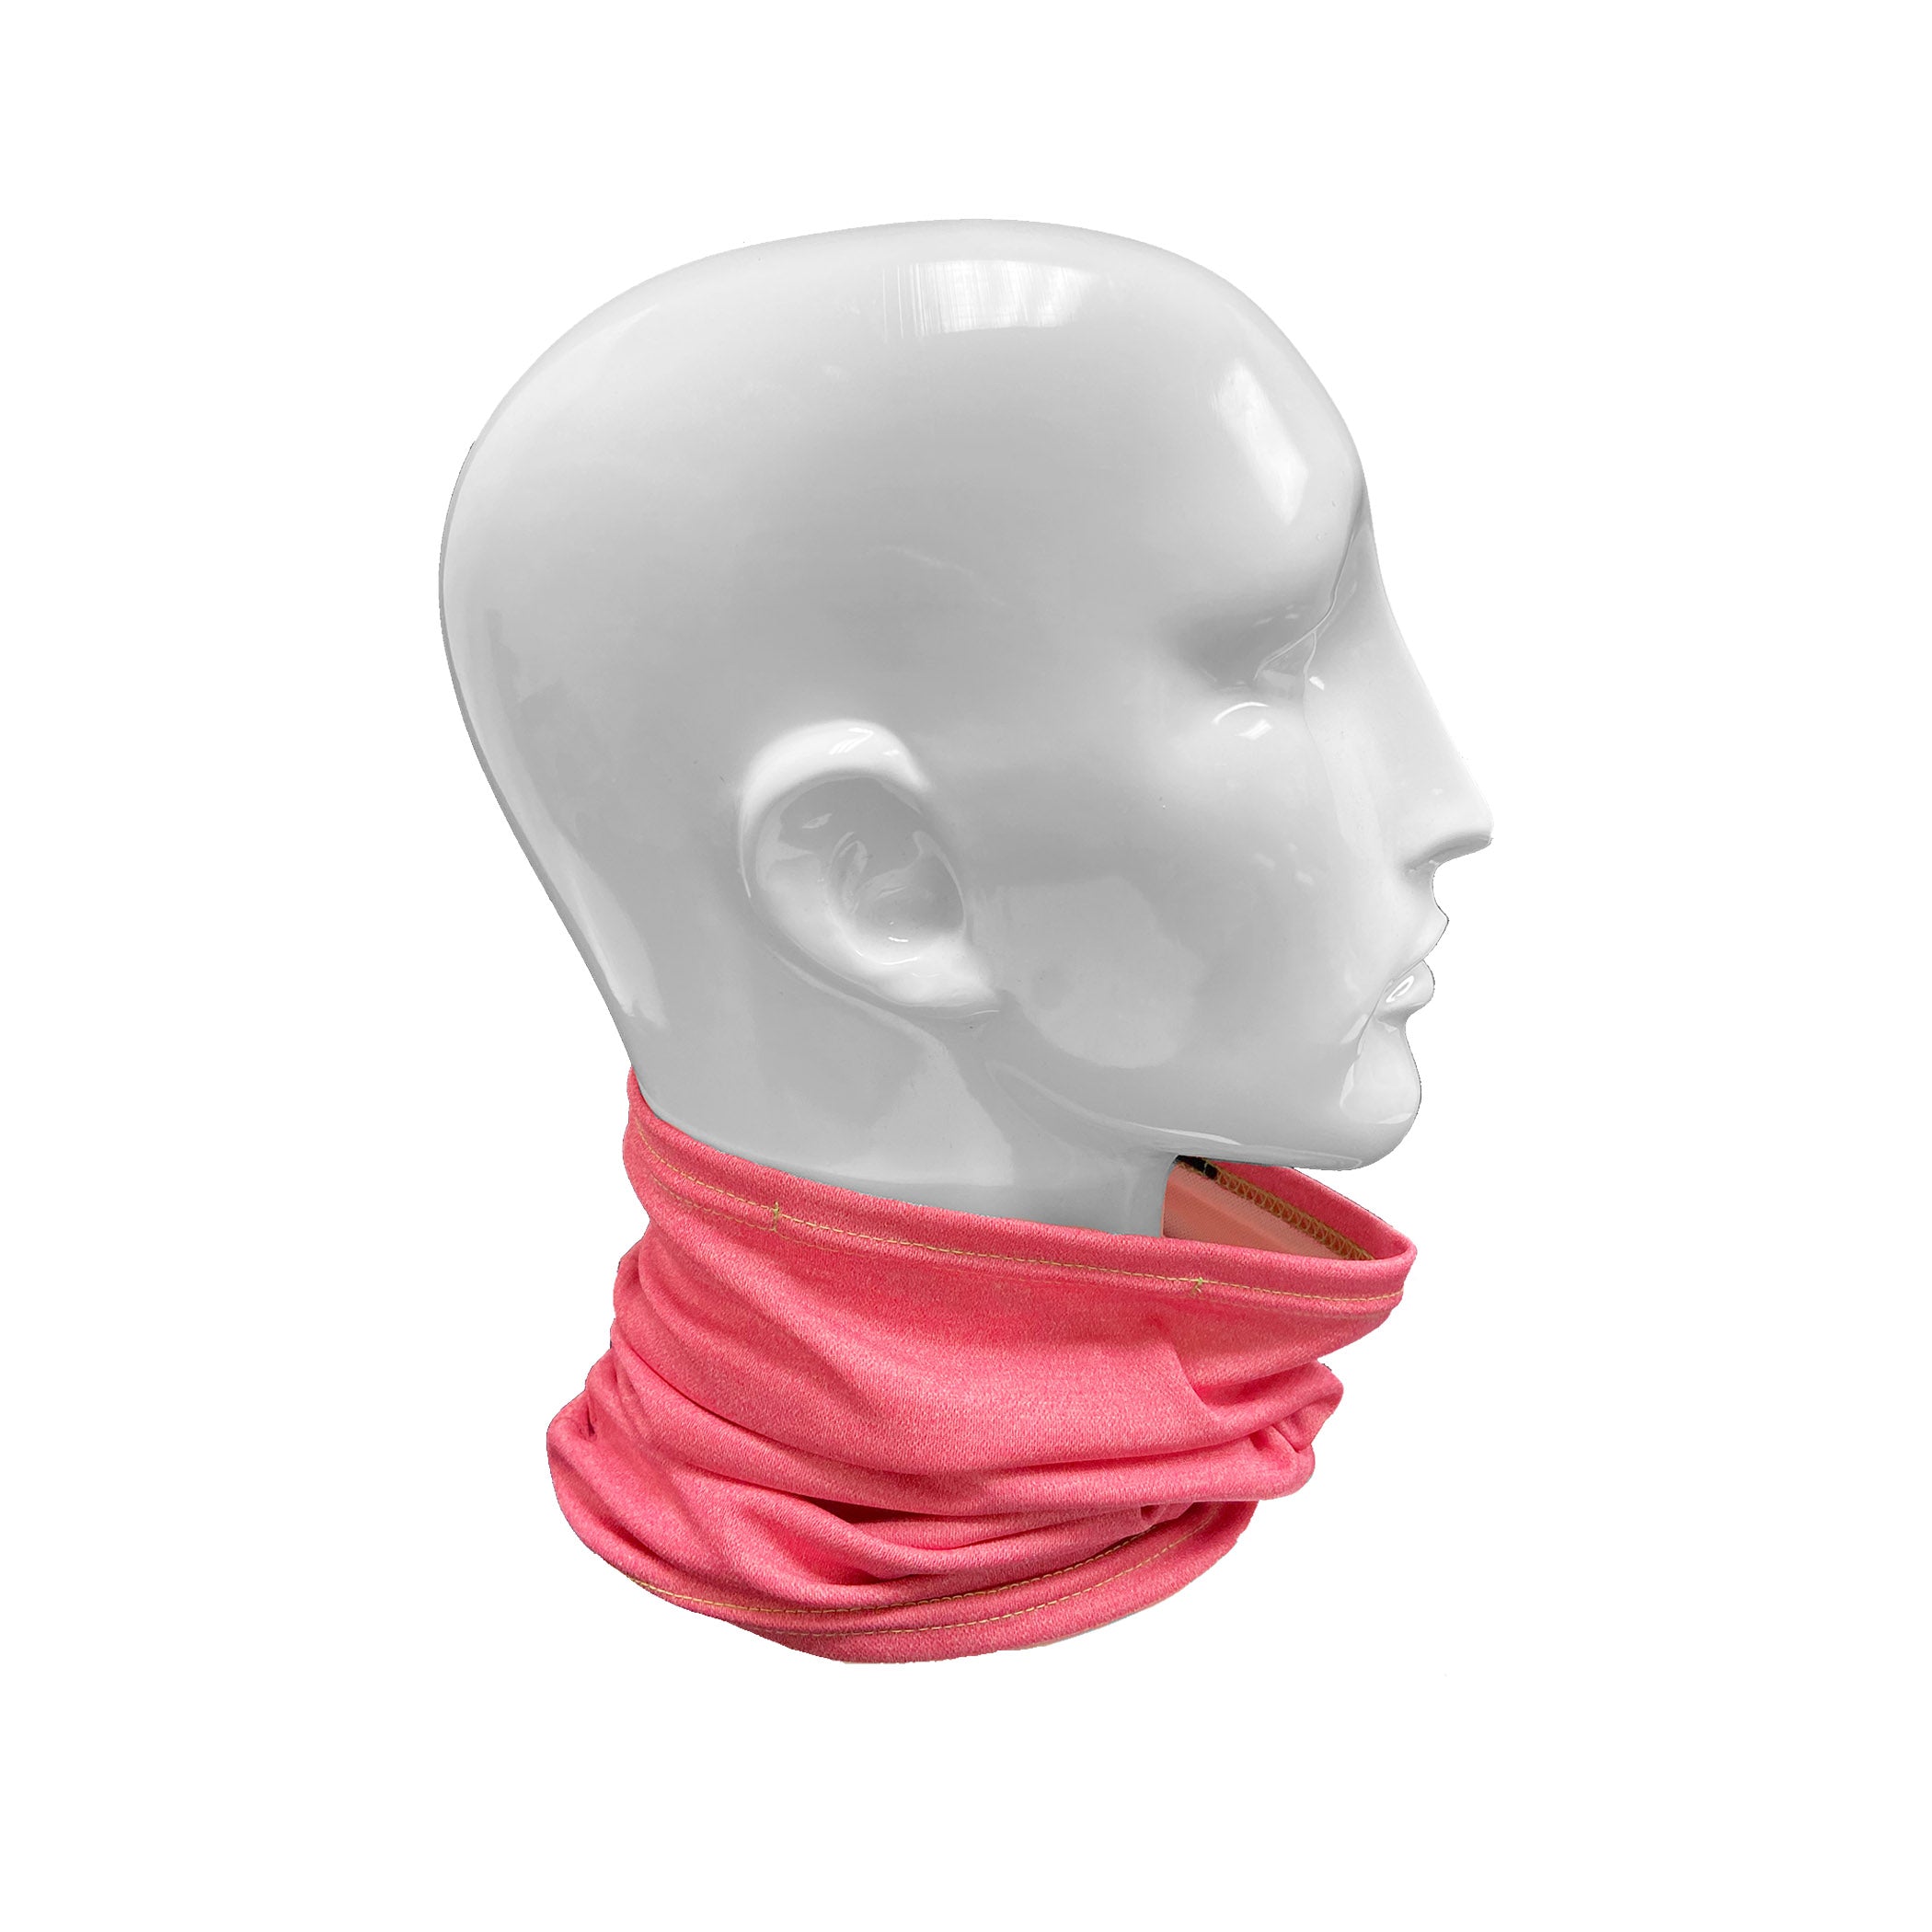 UPF 50+ Neck Gaiter | Tube Scarf for Outdoor Activity | 2-layer | Comfortable Ear Loops | Unisex | 5 Colors - CHERRYSTONEstyle